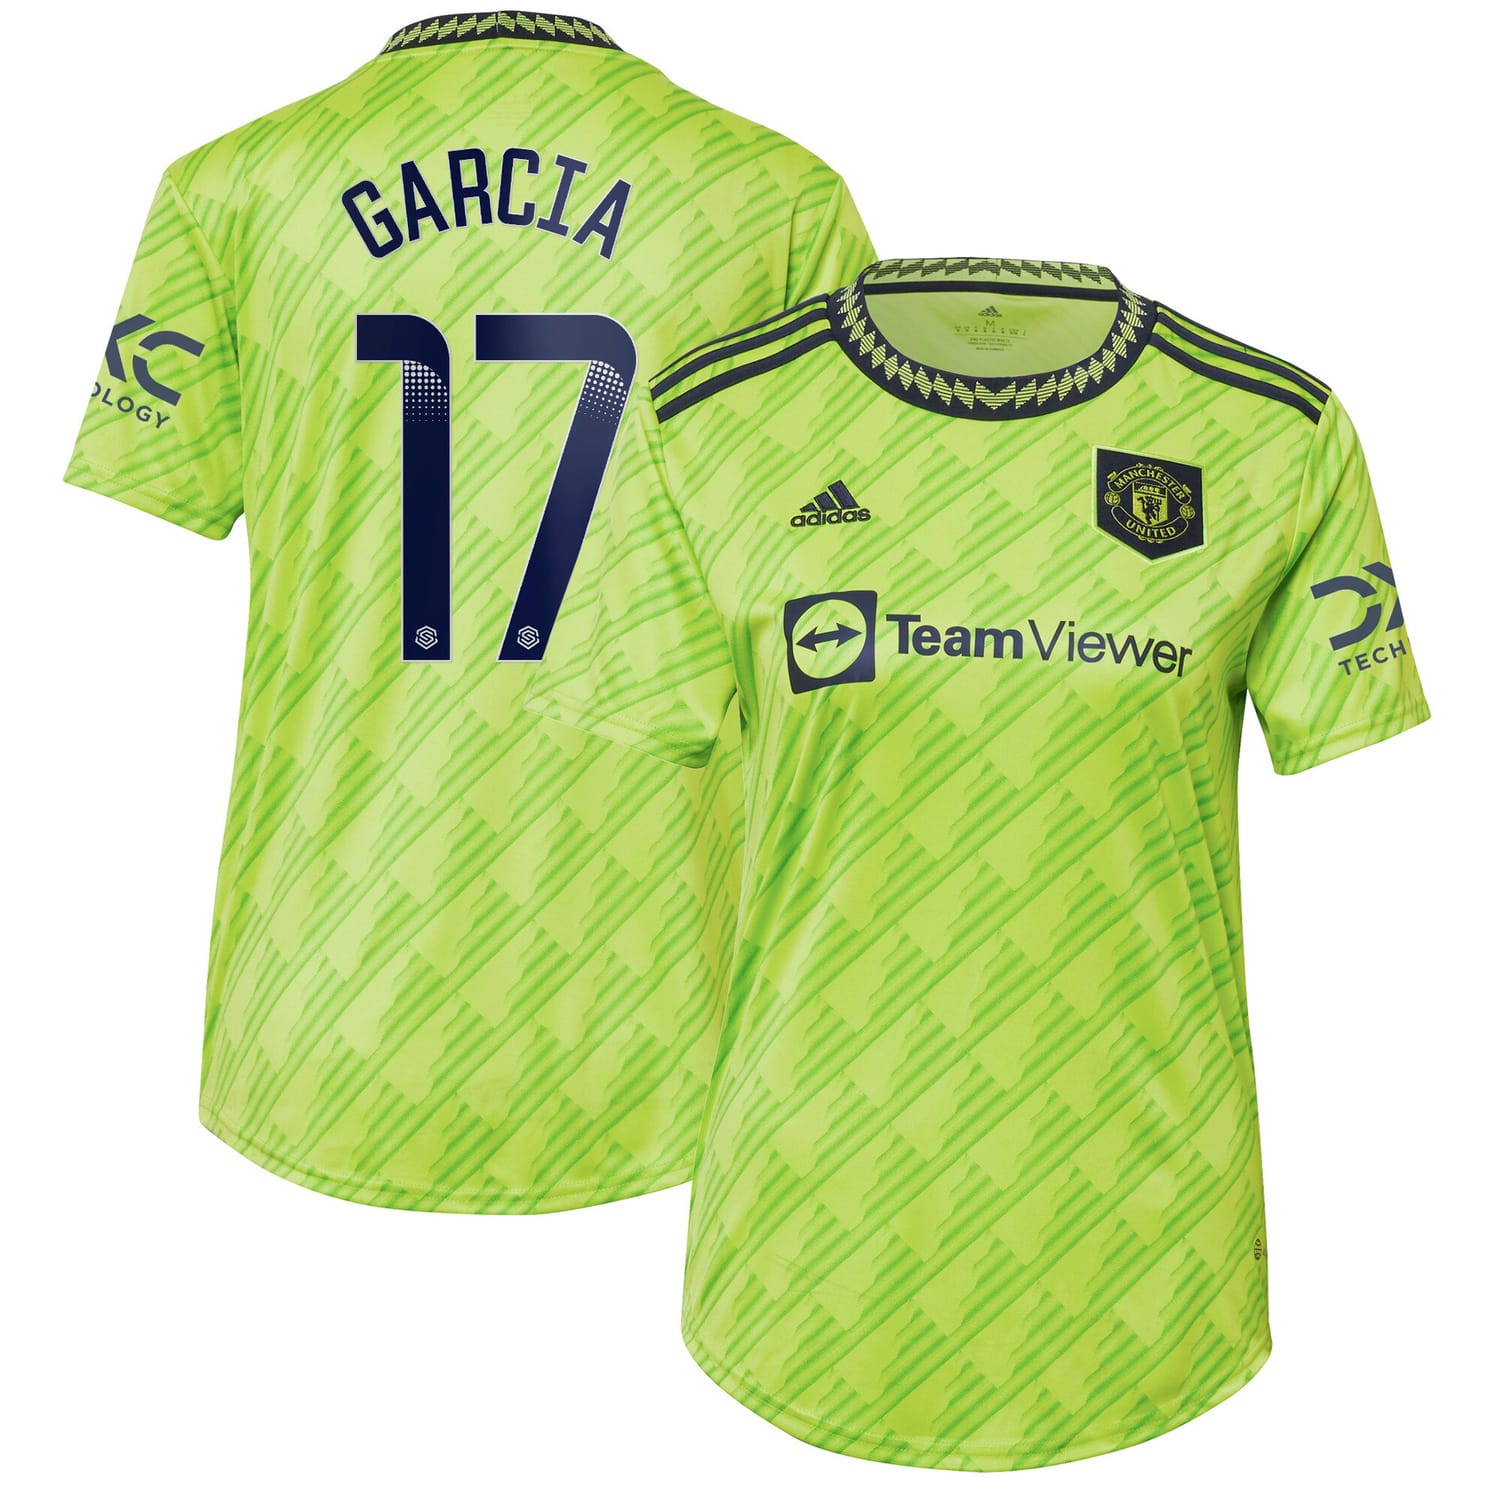 Premier League Manchester United Third WSL Jersey Shirt 2022-23 player Lucia Garcia 17 printing for Women